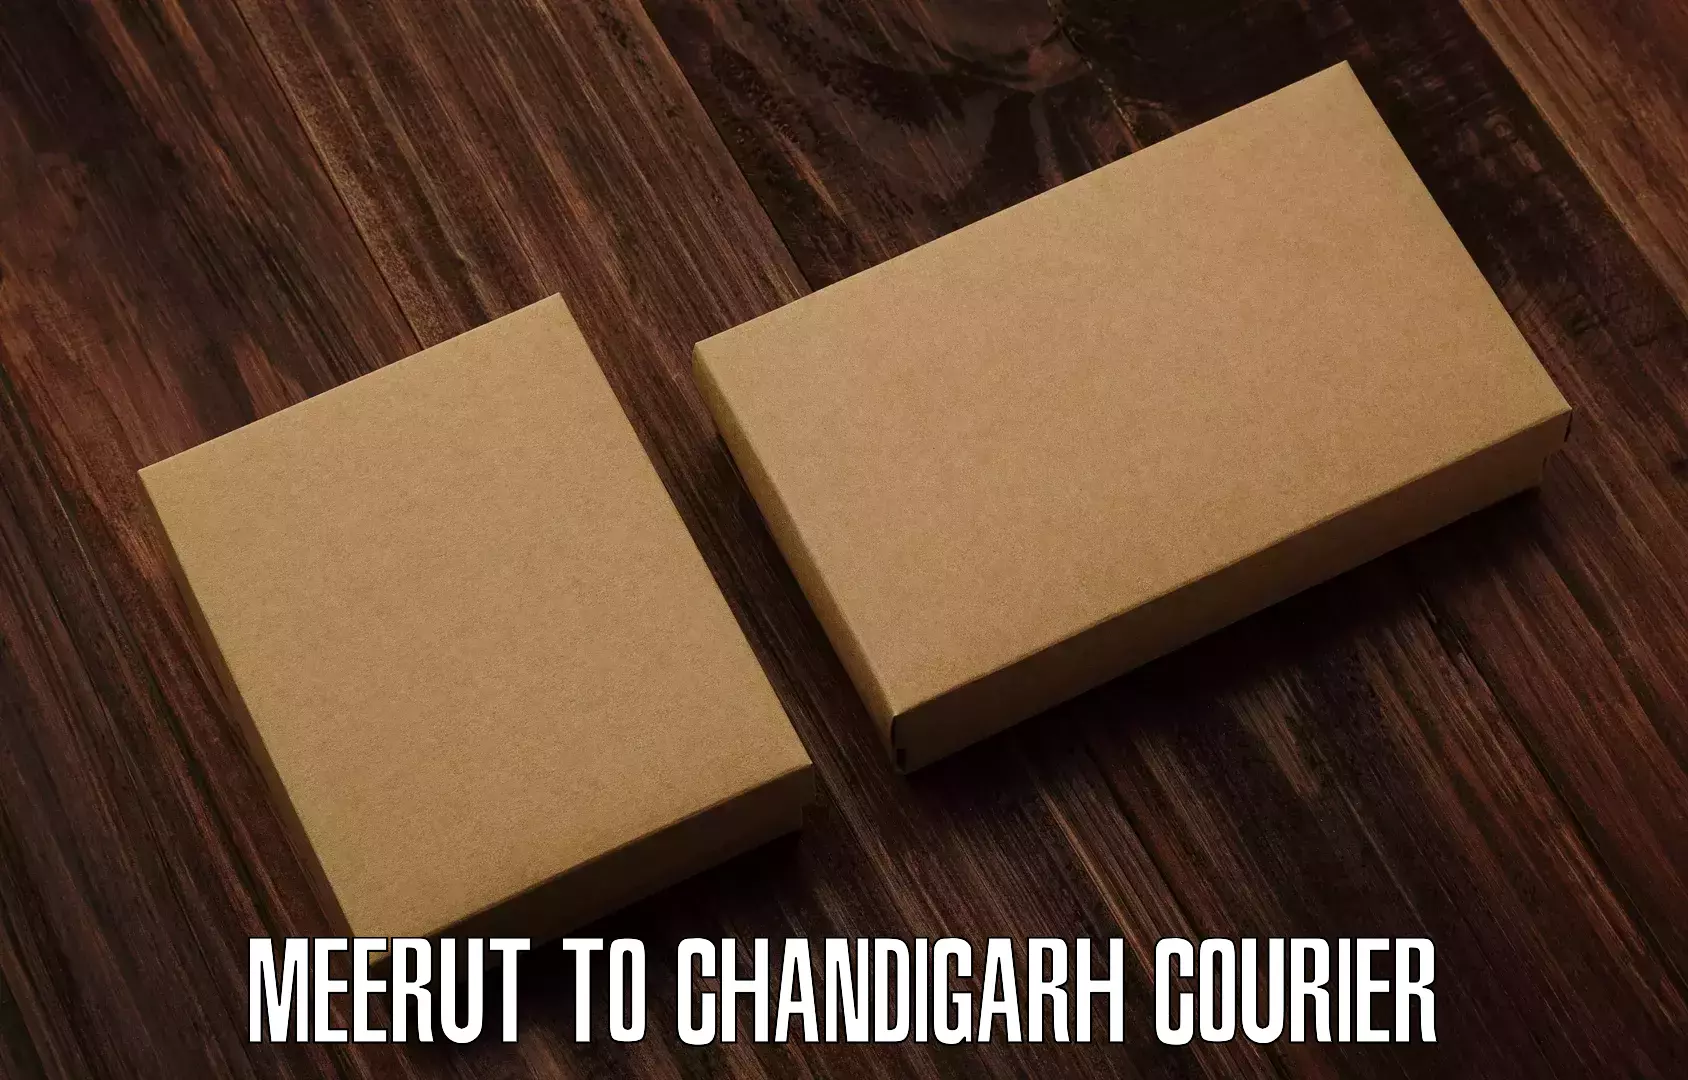 Supply chain delivery Meerut to Chandigarh